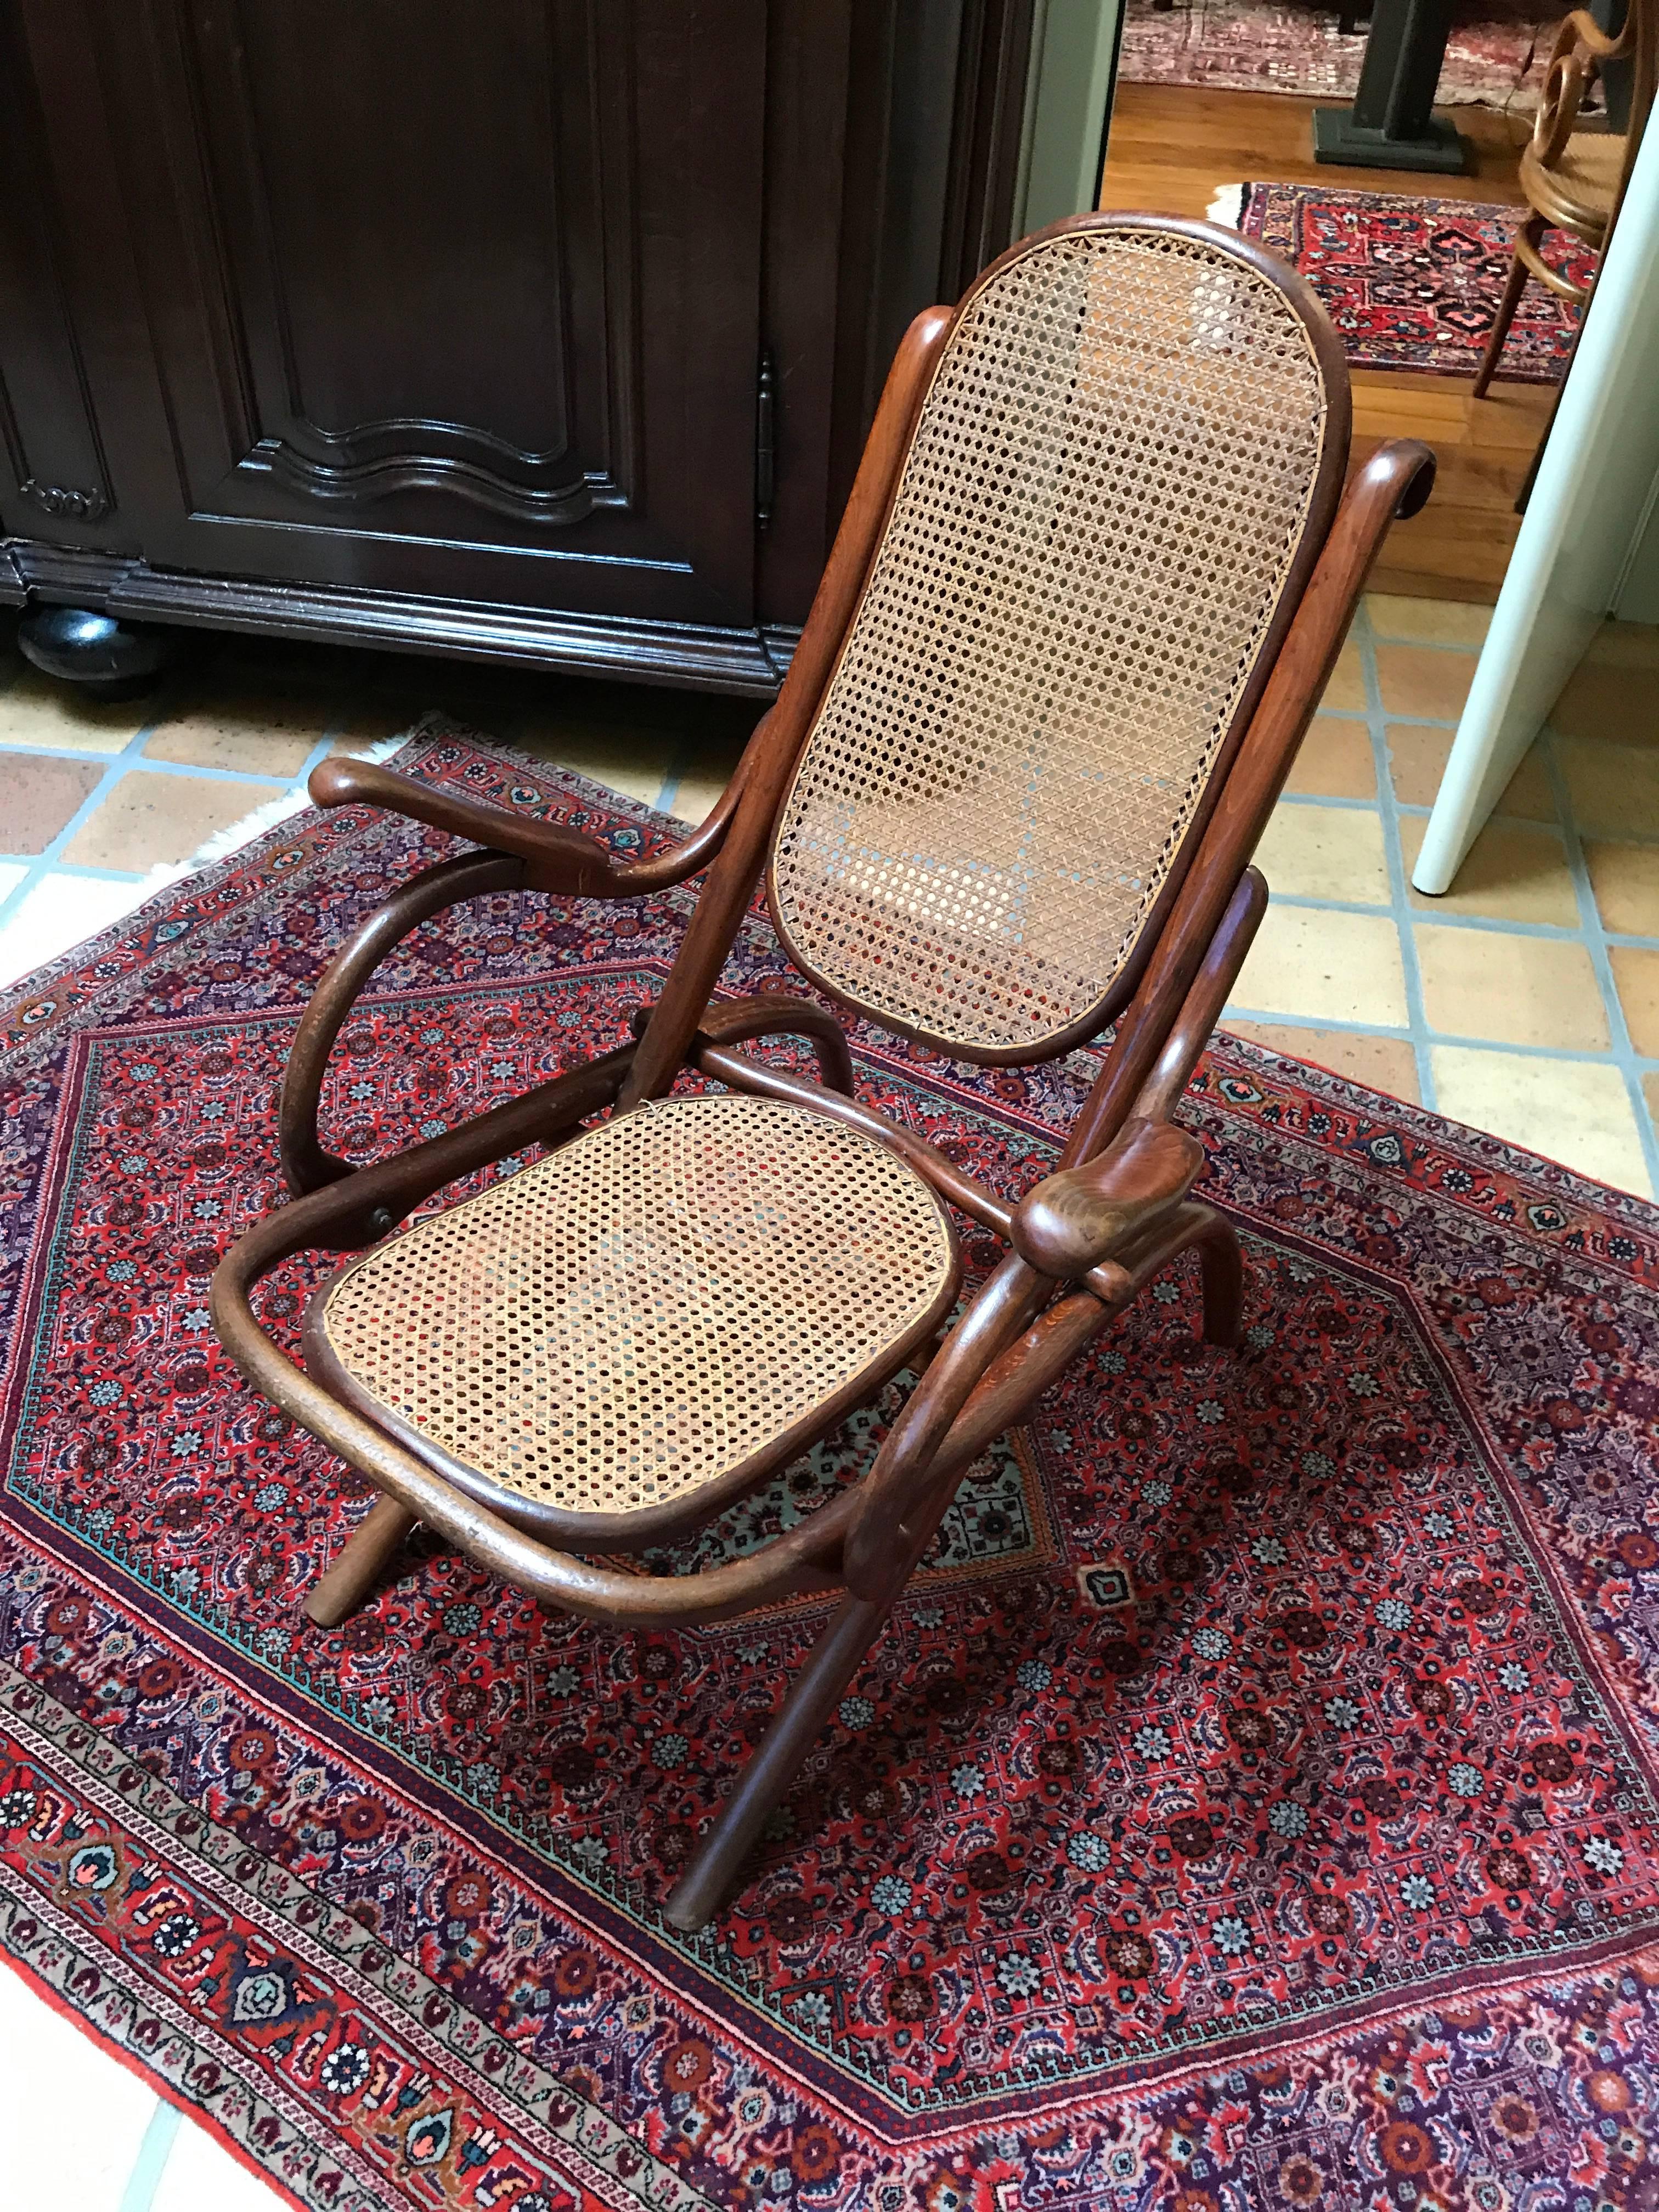 Oldest form of an easy armchair
folding chair of Thonet nr 1 
Rare oldest form and first stamp by Thonet, 1867
Kaminsessel
Measures: 75 x 64 x 98 x 42.
 